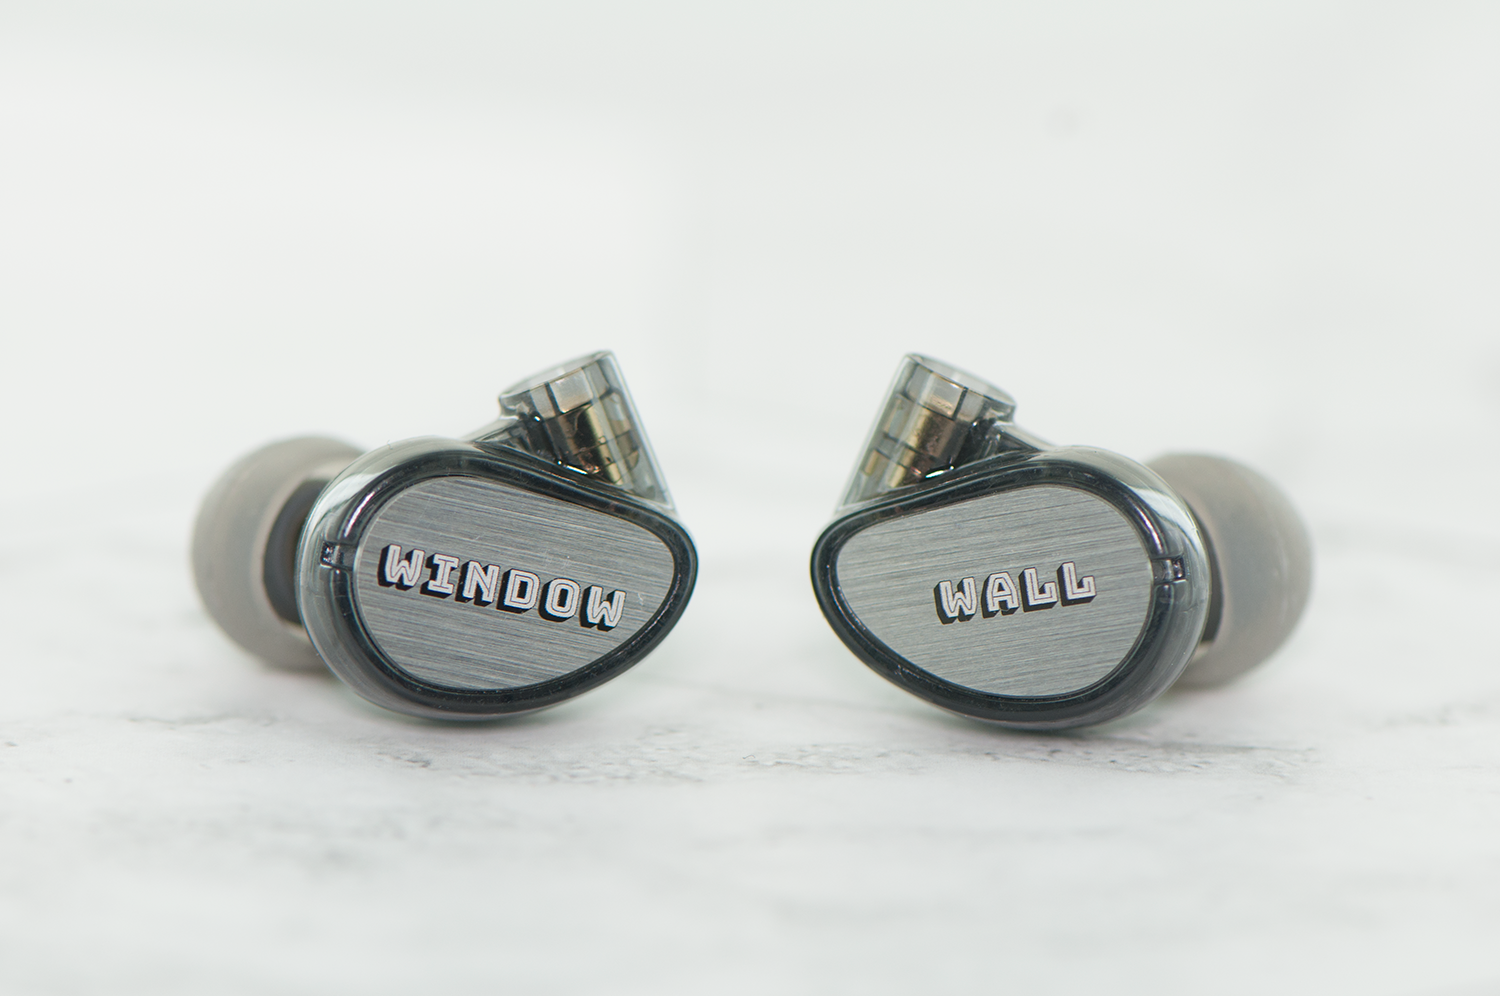 Two earphones with the words "window" and "wall" written on each earpiece, placed against a white background.